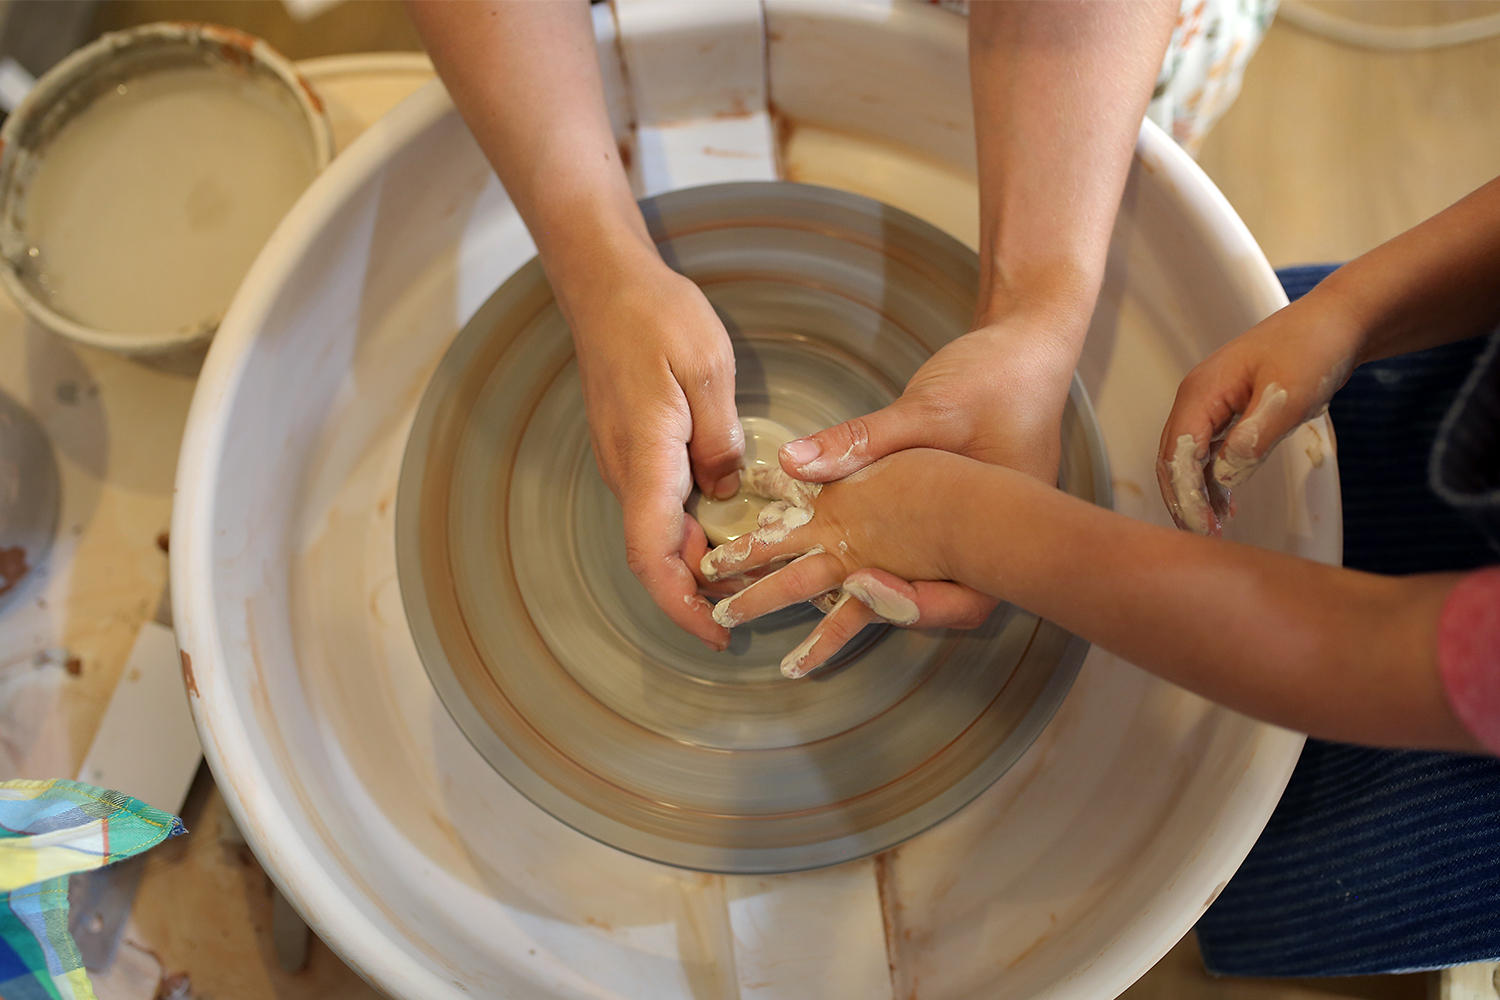 4:39 Nana has been working with pottery since she was 13. By age 17, she was already teaching and sh ...